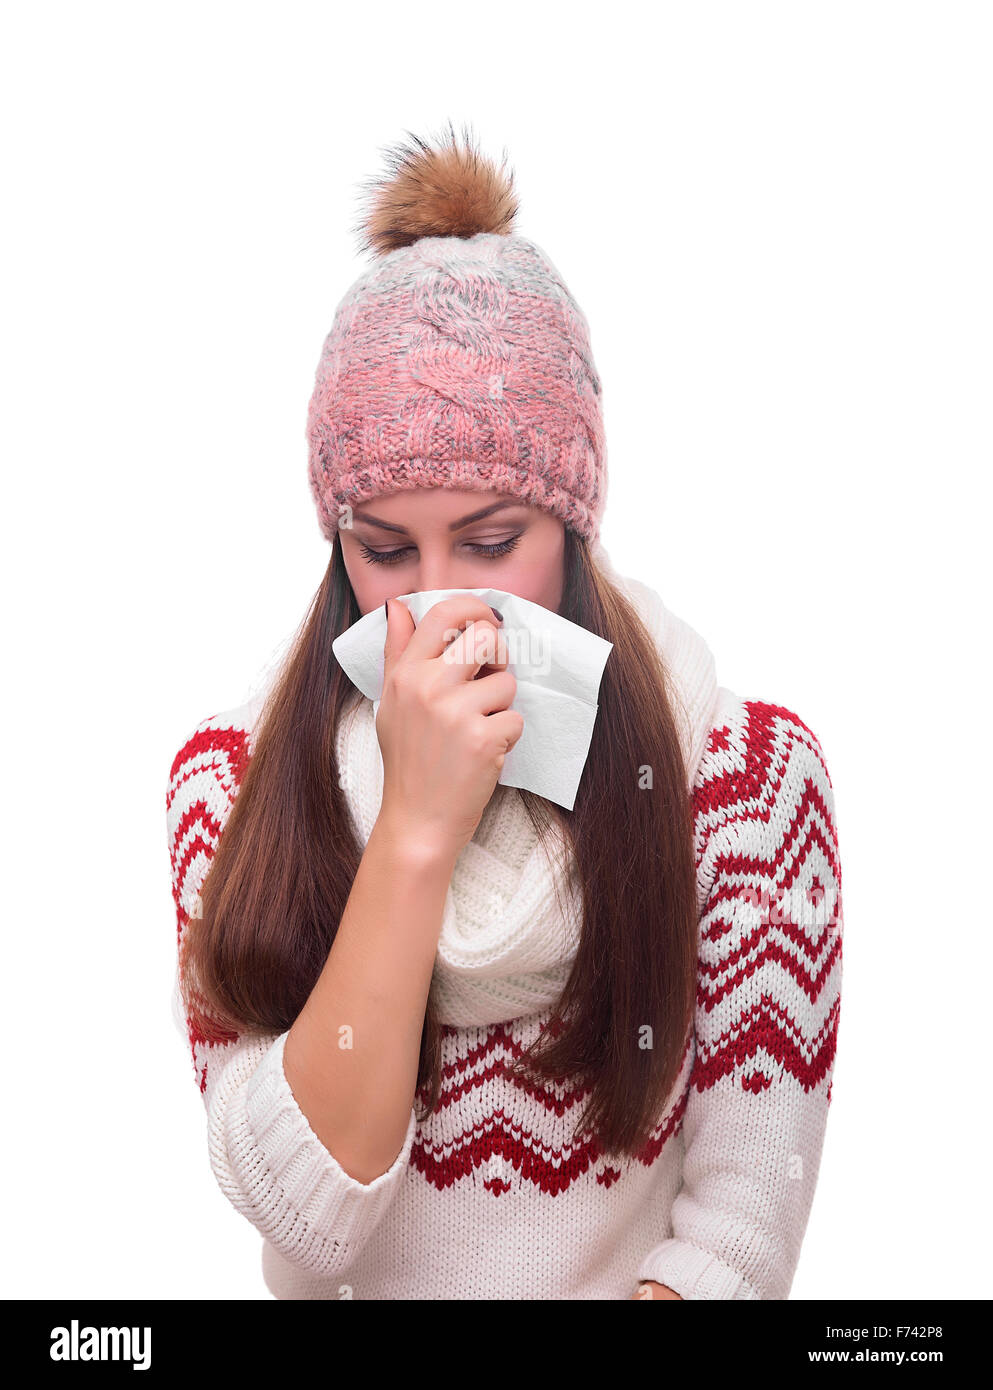 Runny nose of the girl. Stock Photo